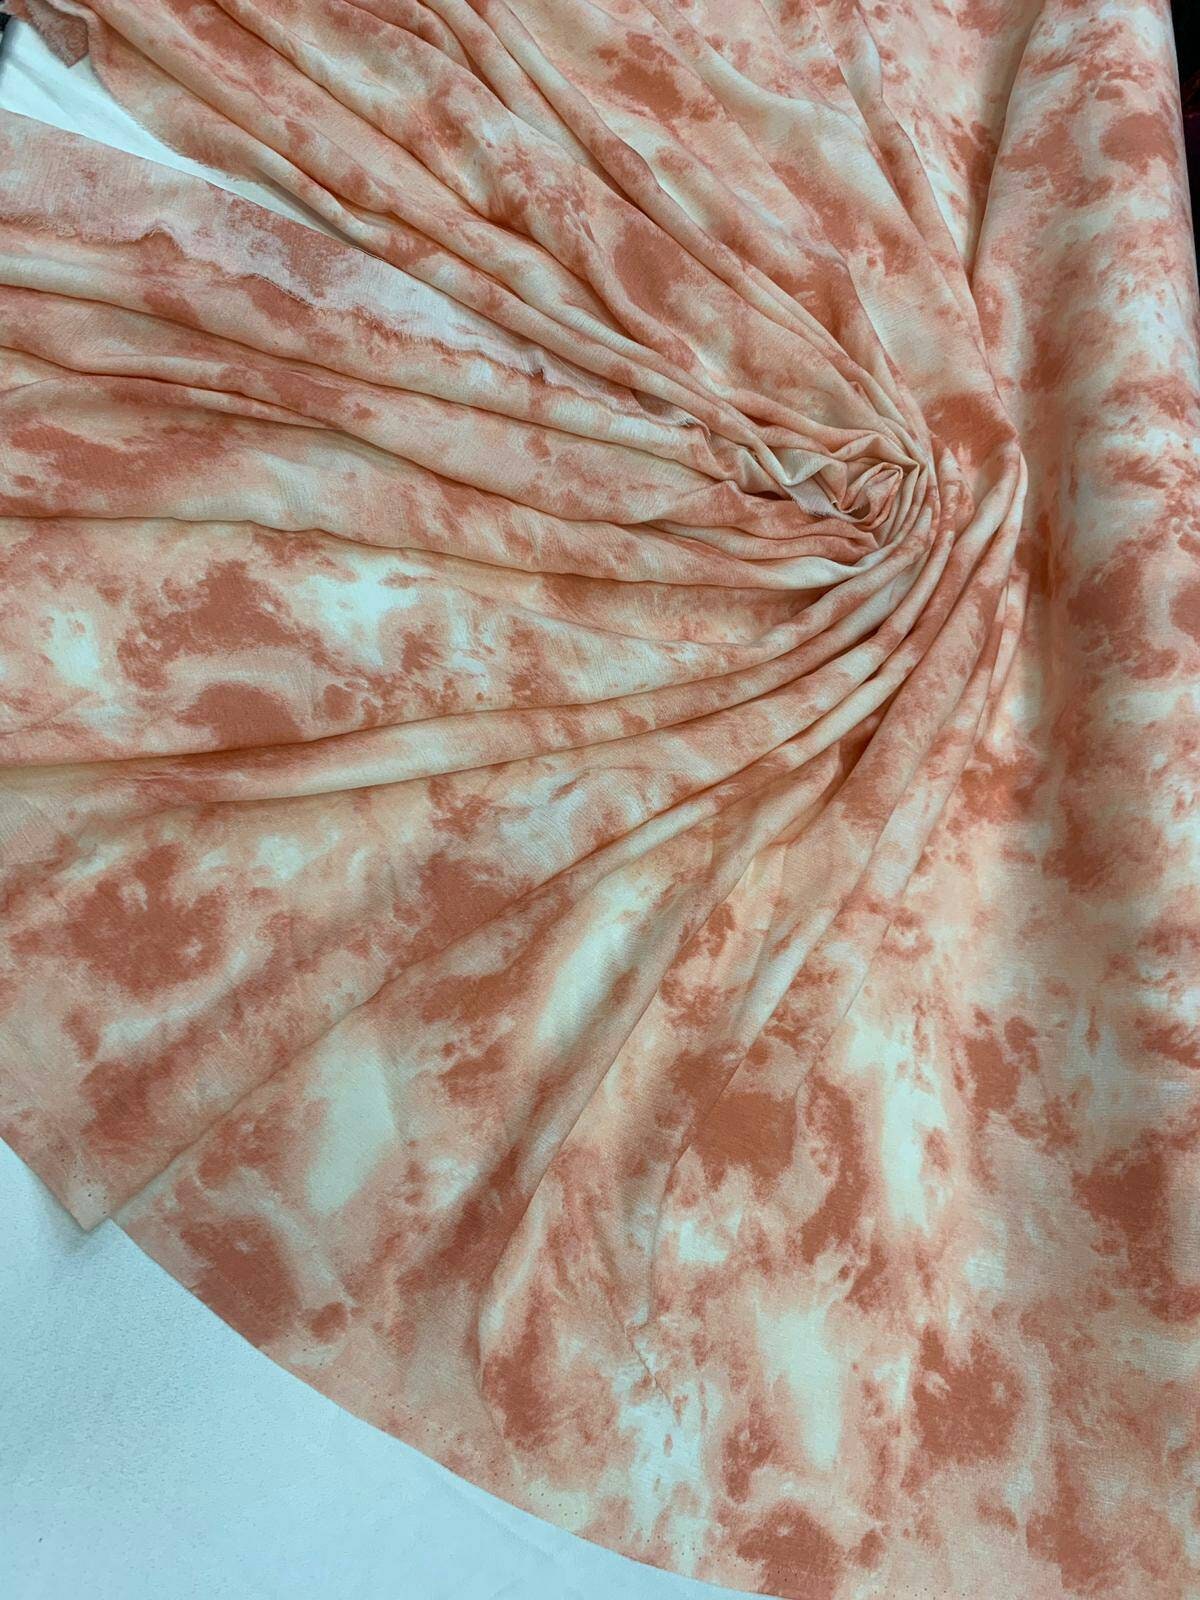 Rayon crepon Blush Peach abstract 51-52 in w Fabric by the yard soft organic kids dress draping clothing decoration flowy fabric